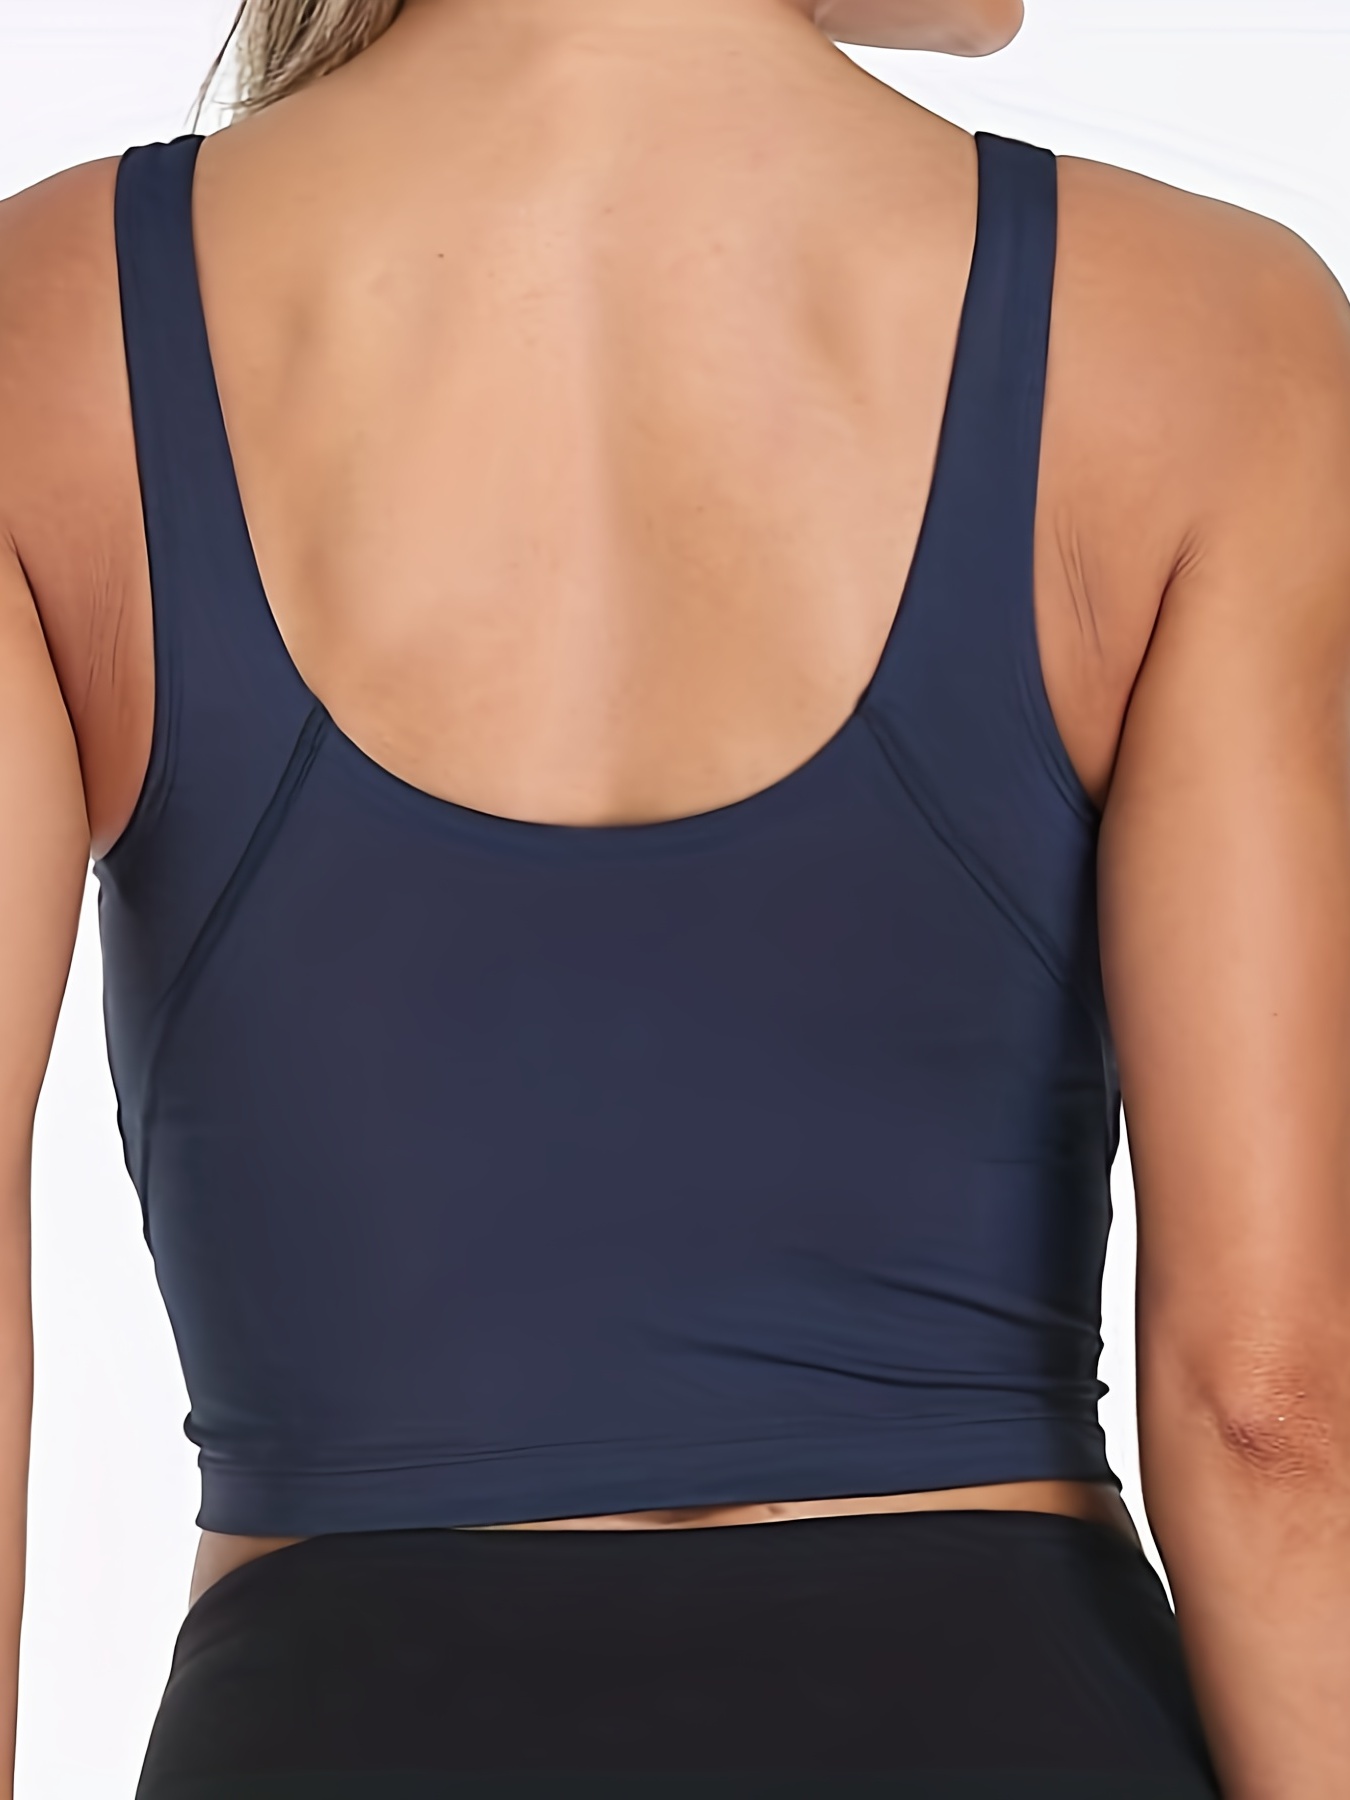 THE GYM PEOPLE Womens Longline Sports Bra Padded Crop Tank Tops Workout Yoga  Bra with Removable Pads (Denim Blue, Small, s) at  Women's Clothing  store